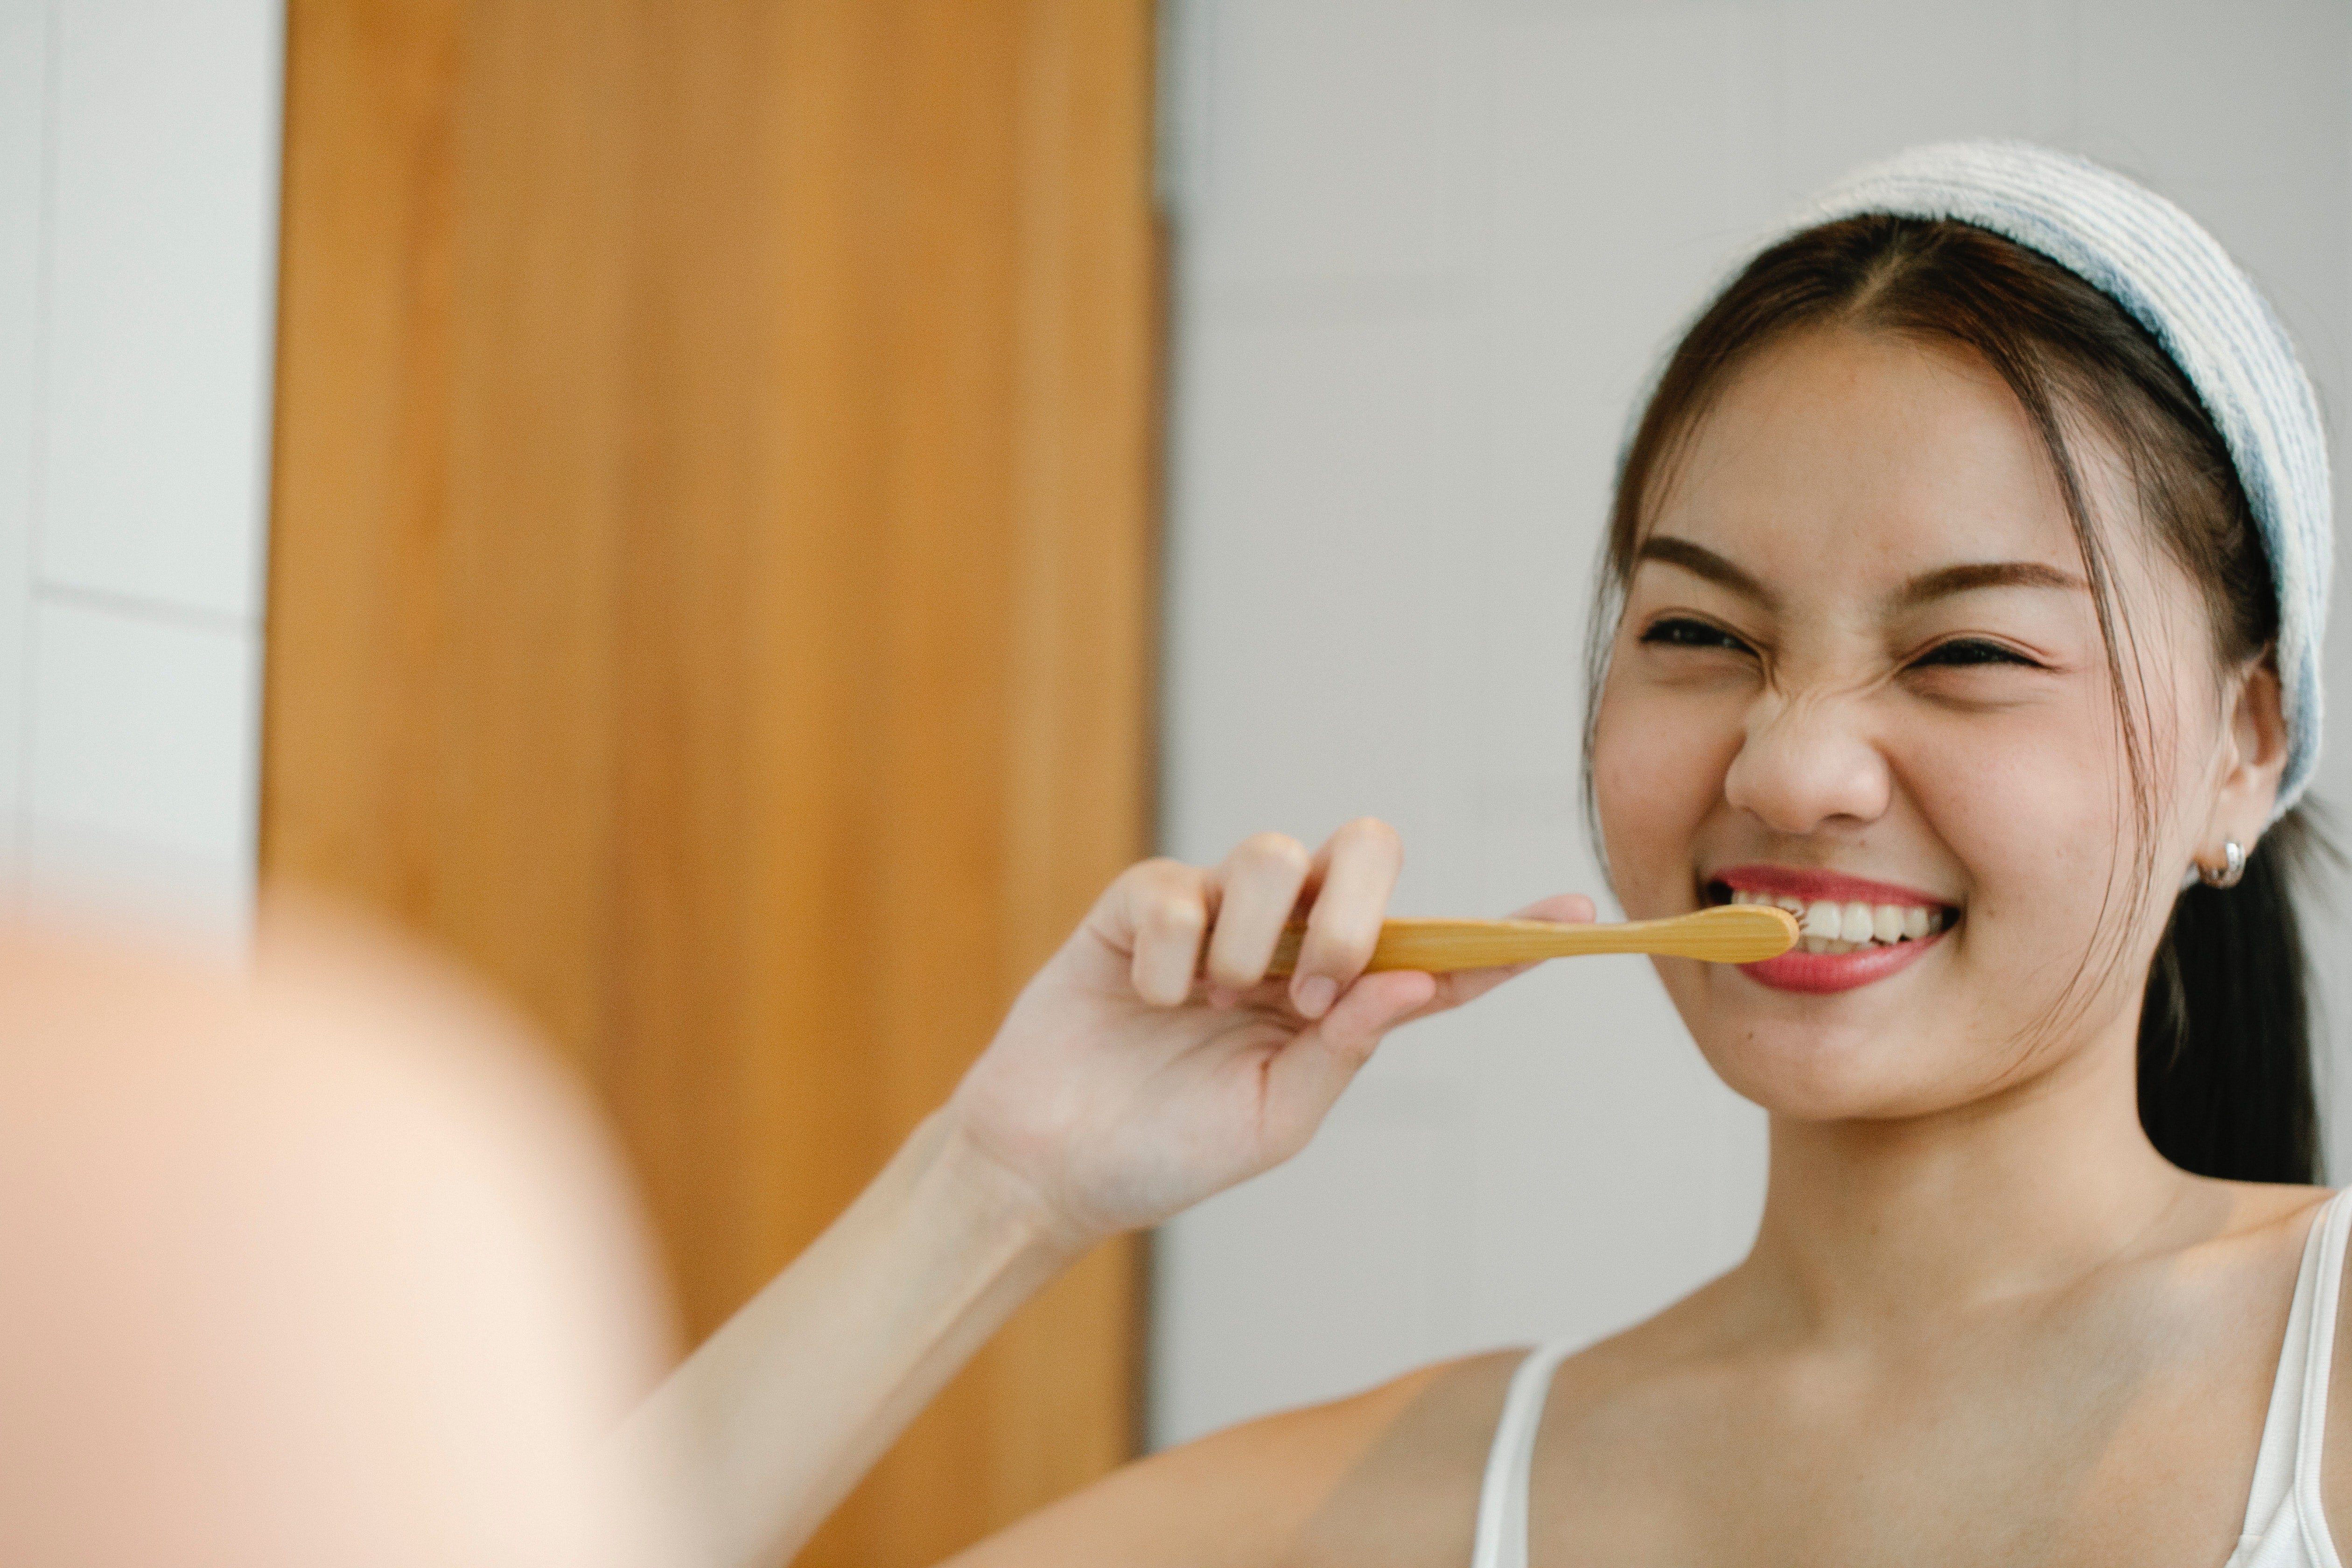 How oral care is a pathway/passway towards self-love